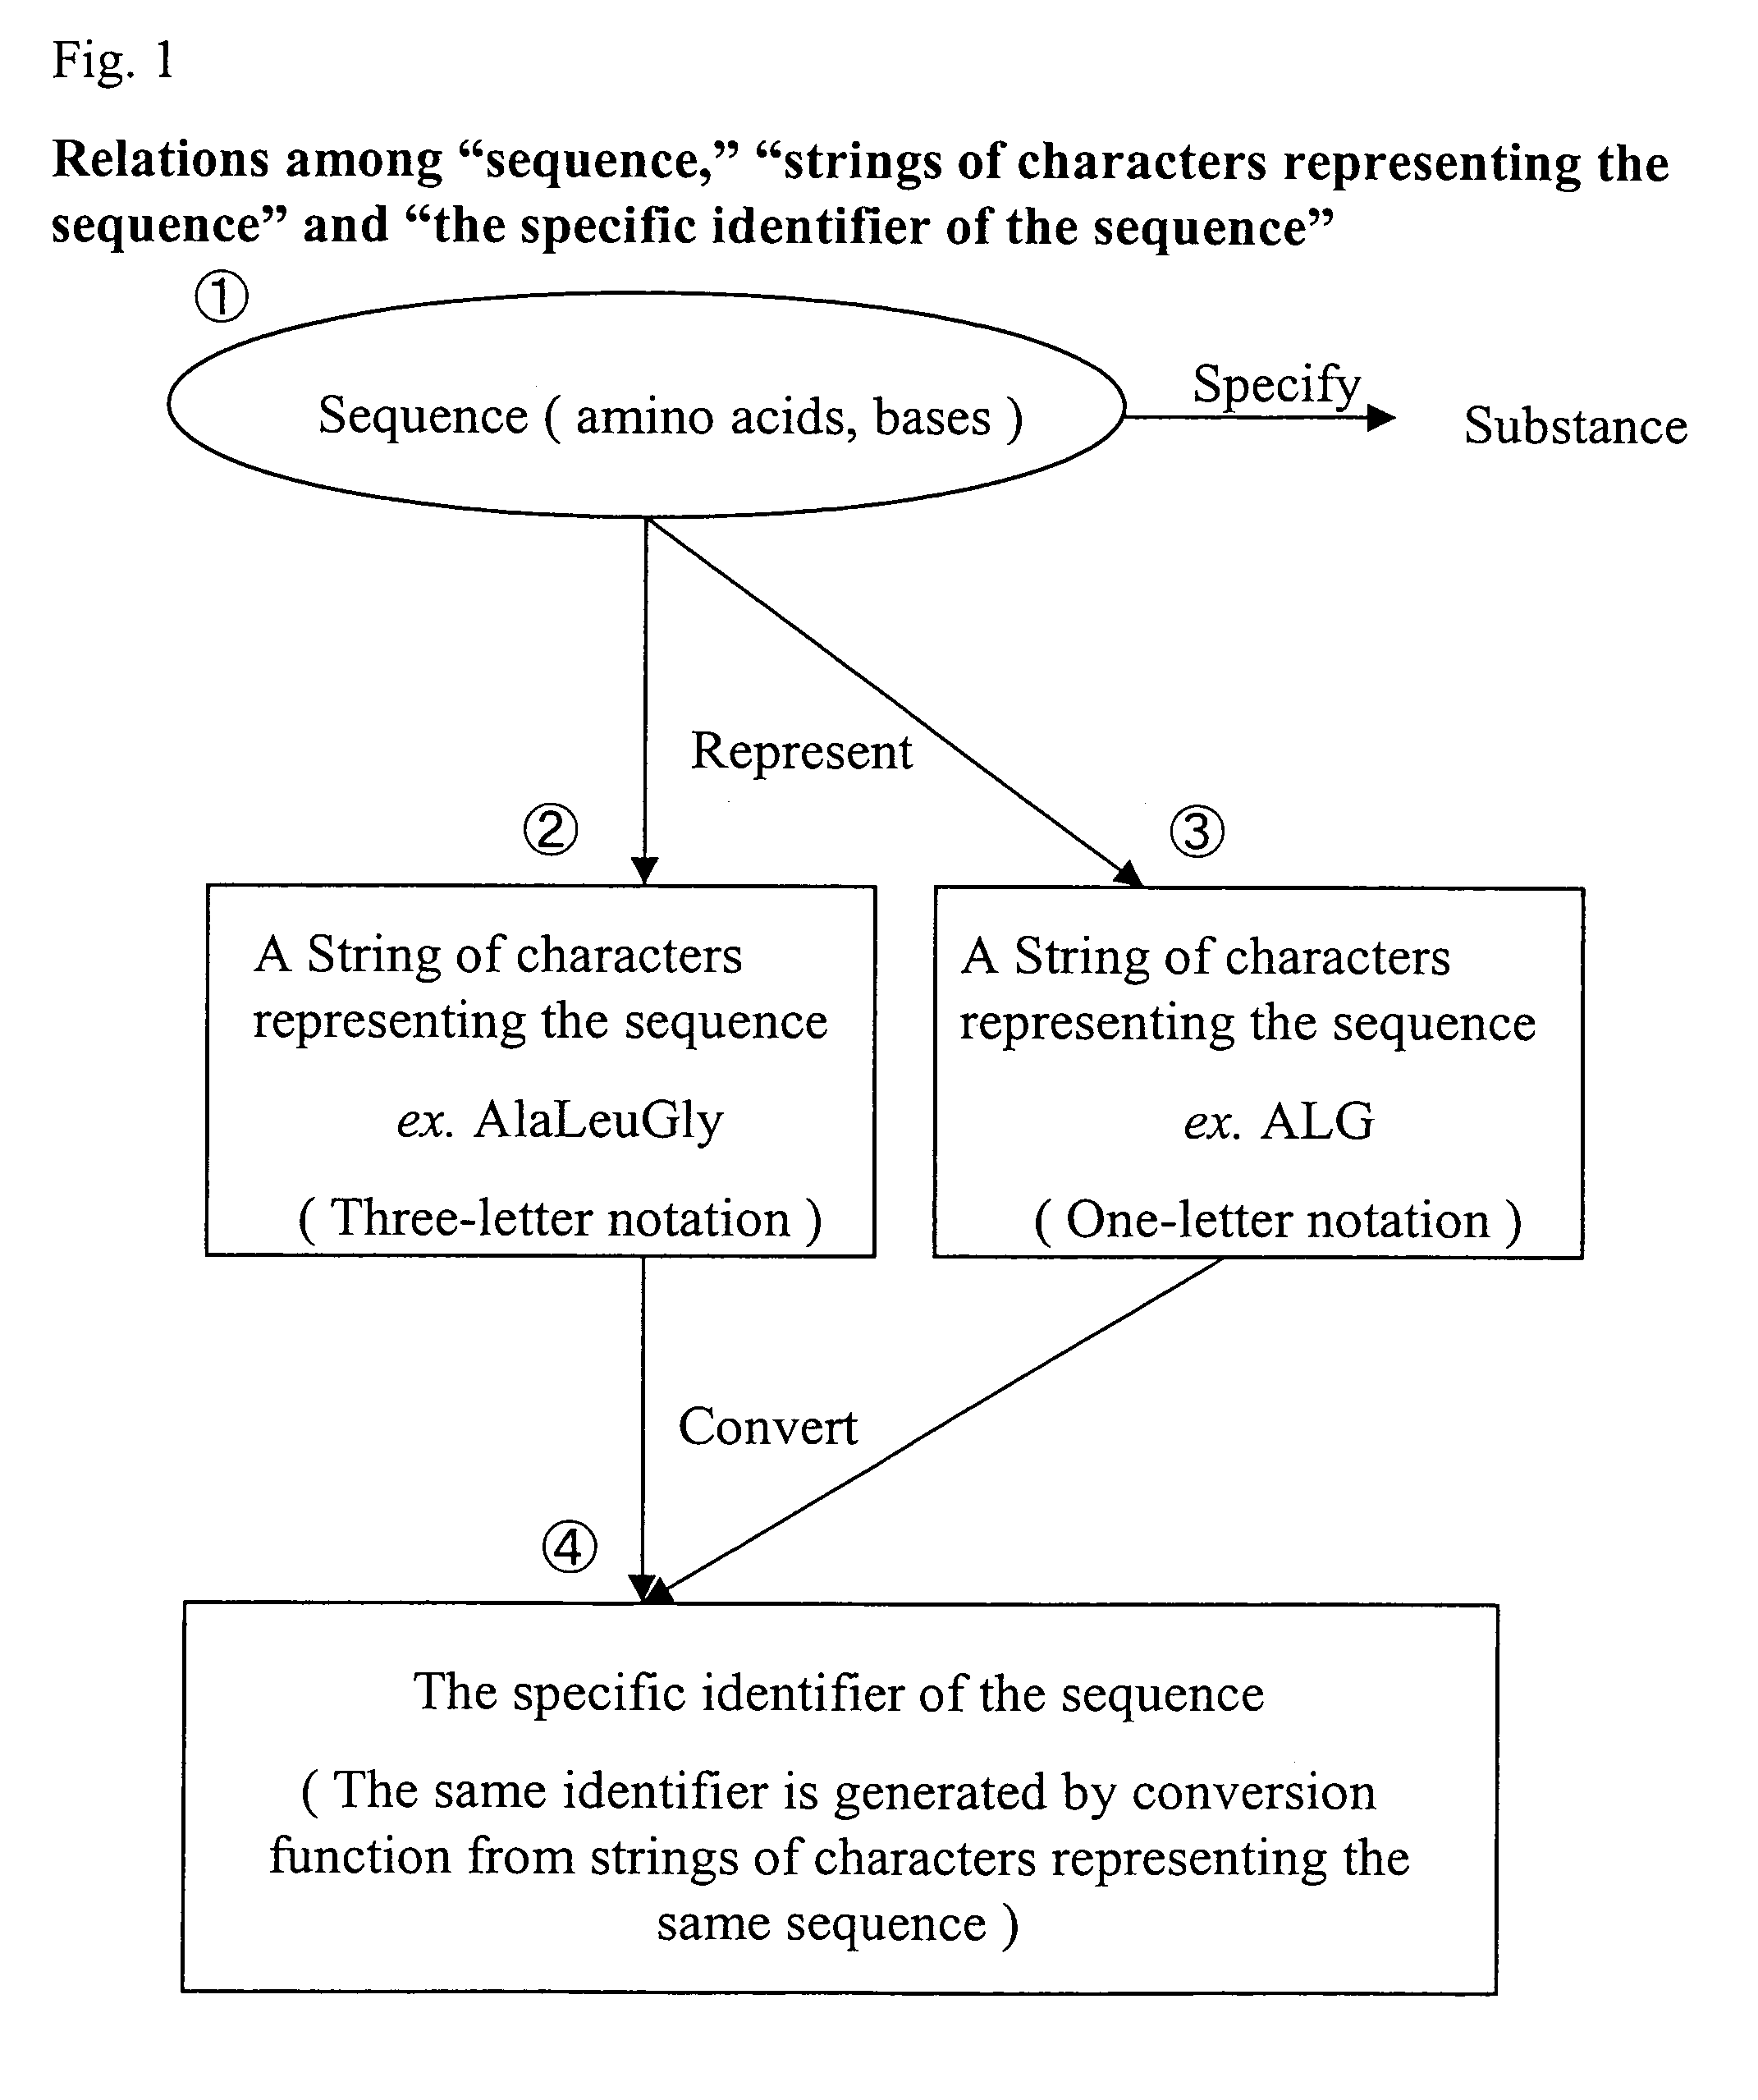 Specific identifiers of amino-acid base sequences